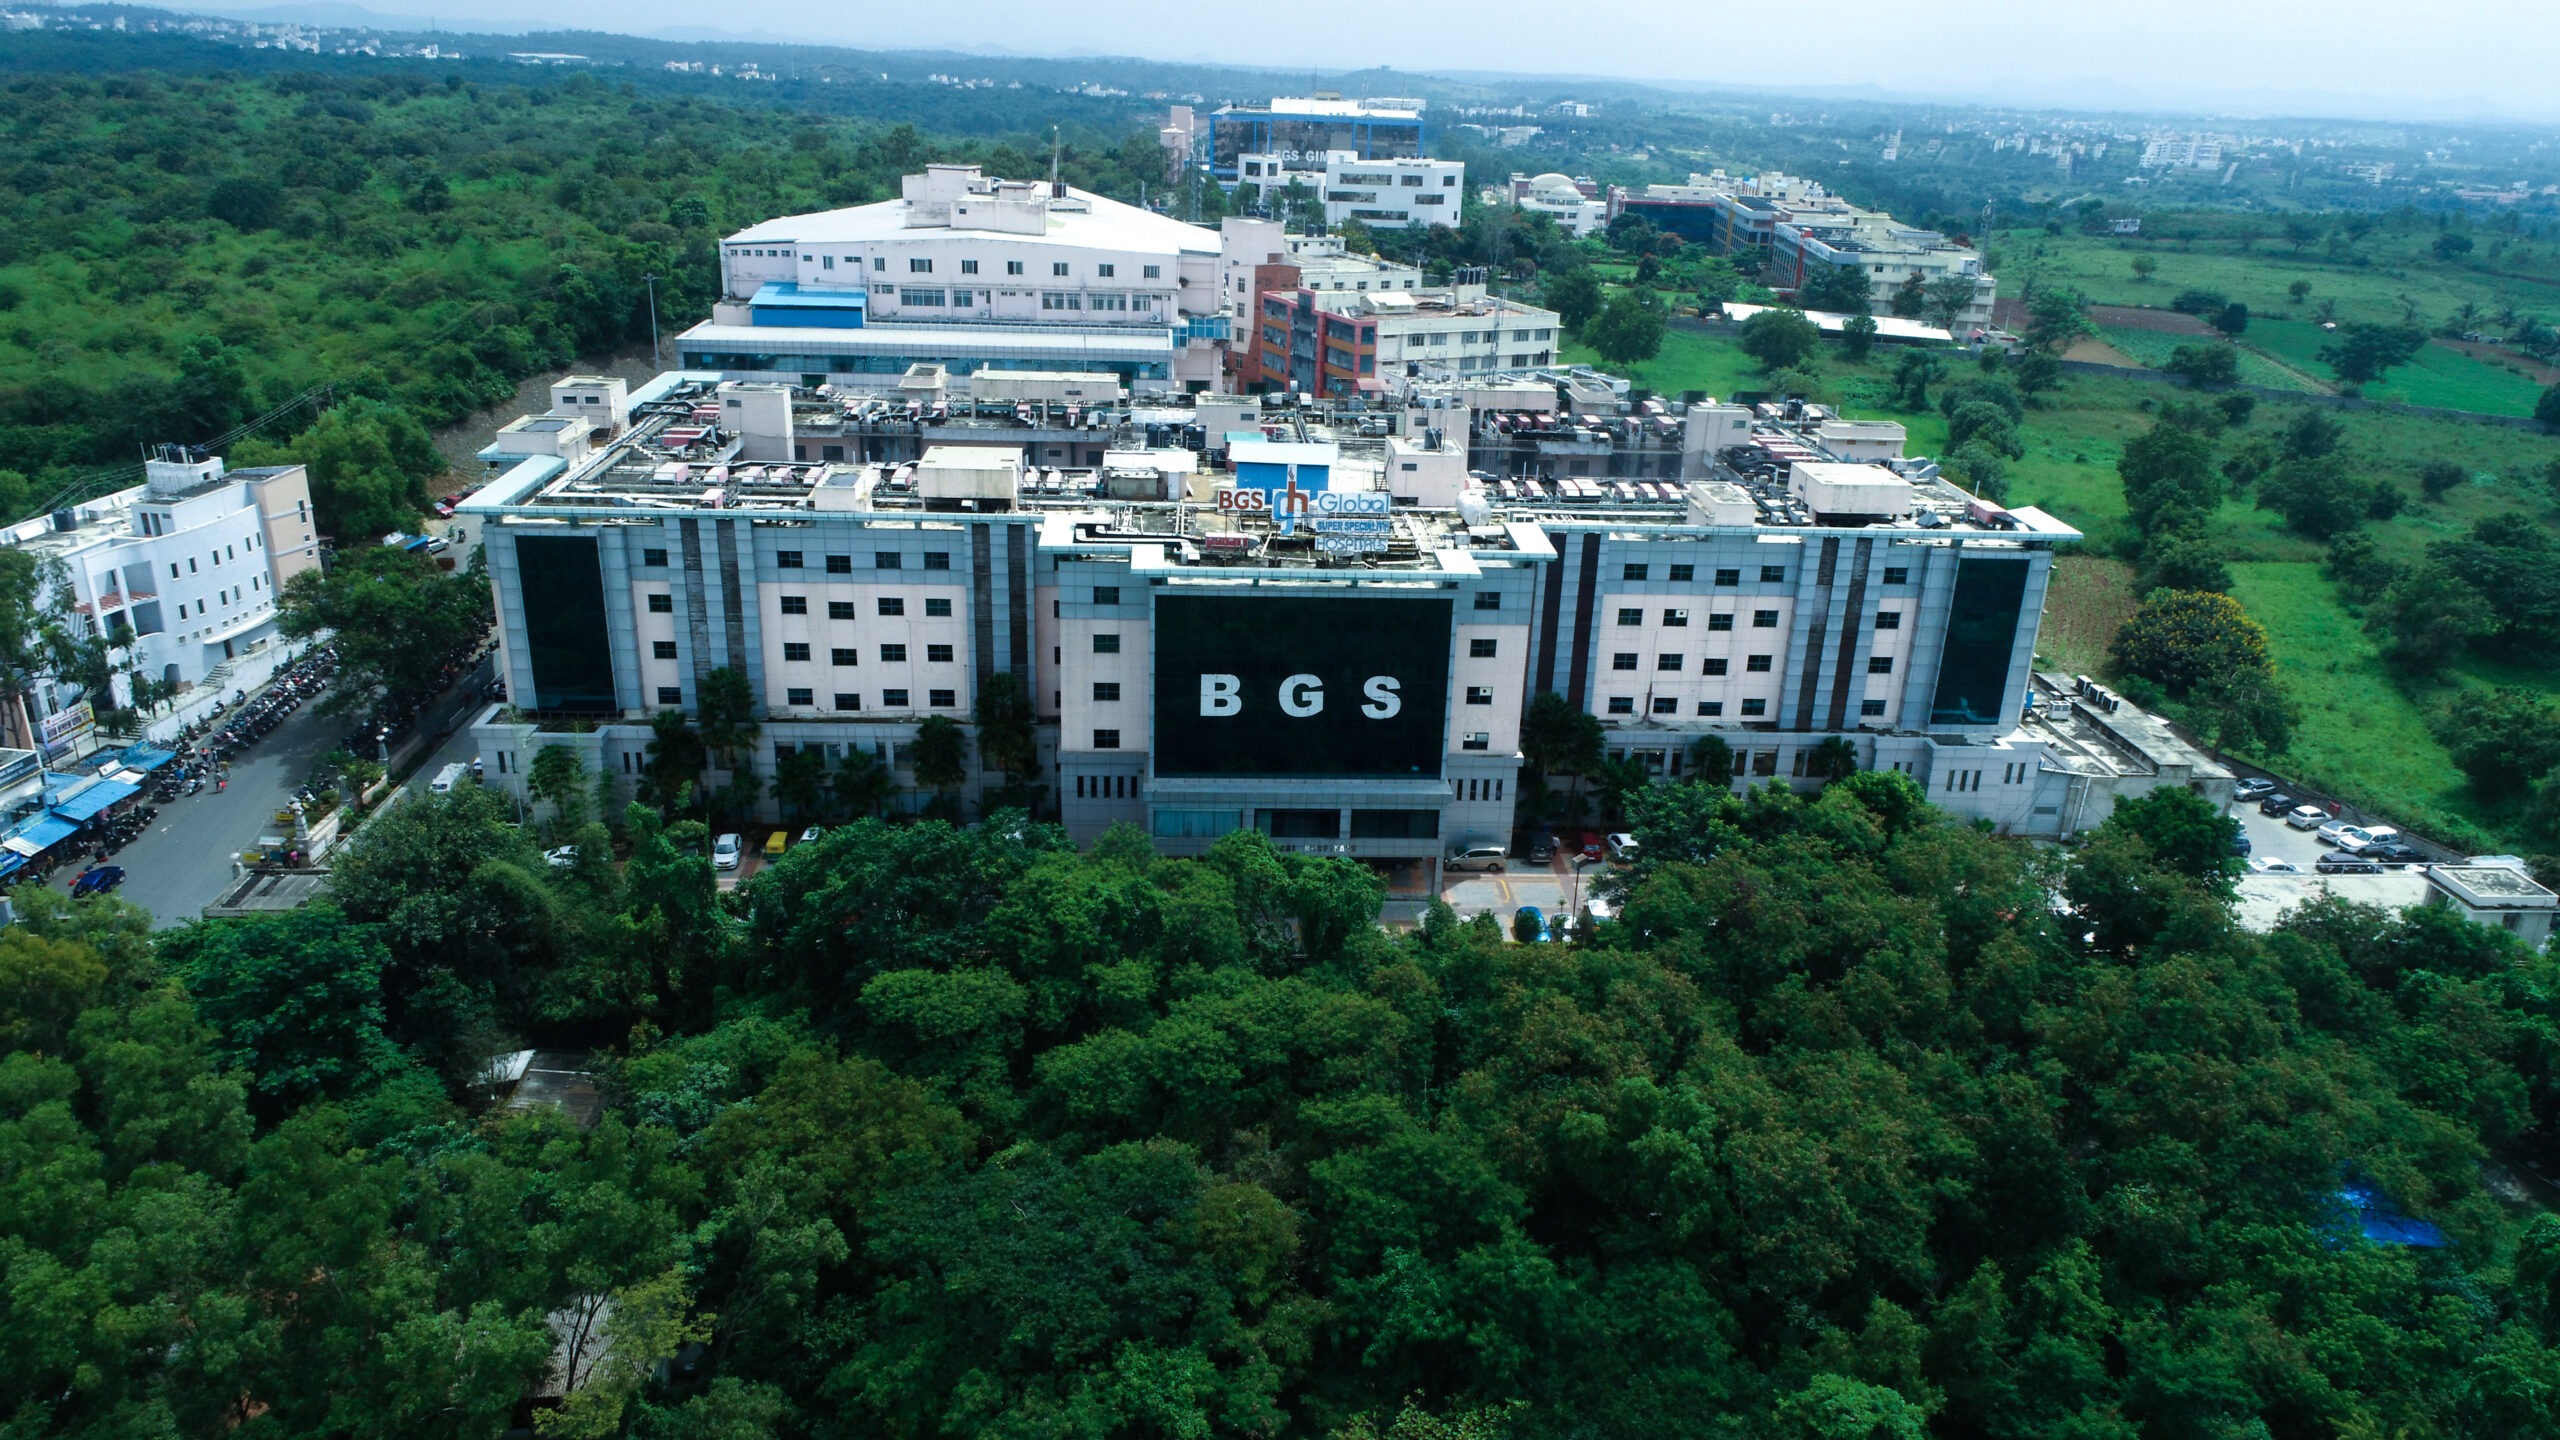 BGS Global Institute of Medical Sciences Bangalore PG(MD/MS) : Facilities, Courses, Admission Guidance, Fee Structure, How To Apply, Eligibility, Cutoff, Result, Counselling,Contact Details